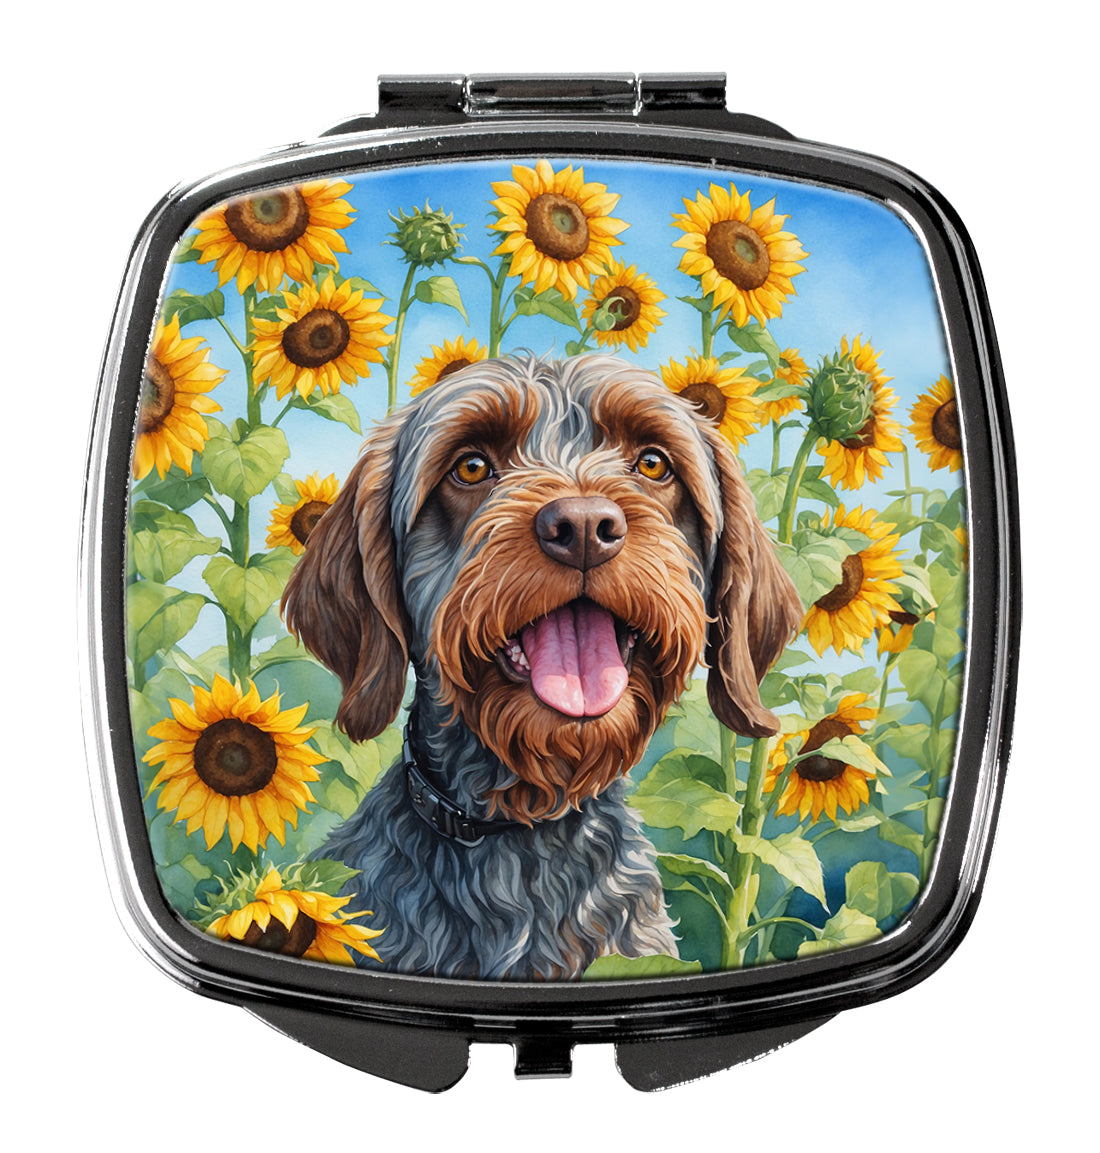 Buy this Wirehaired Pointing Griffon in Sunflowers Compact Mirror